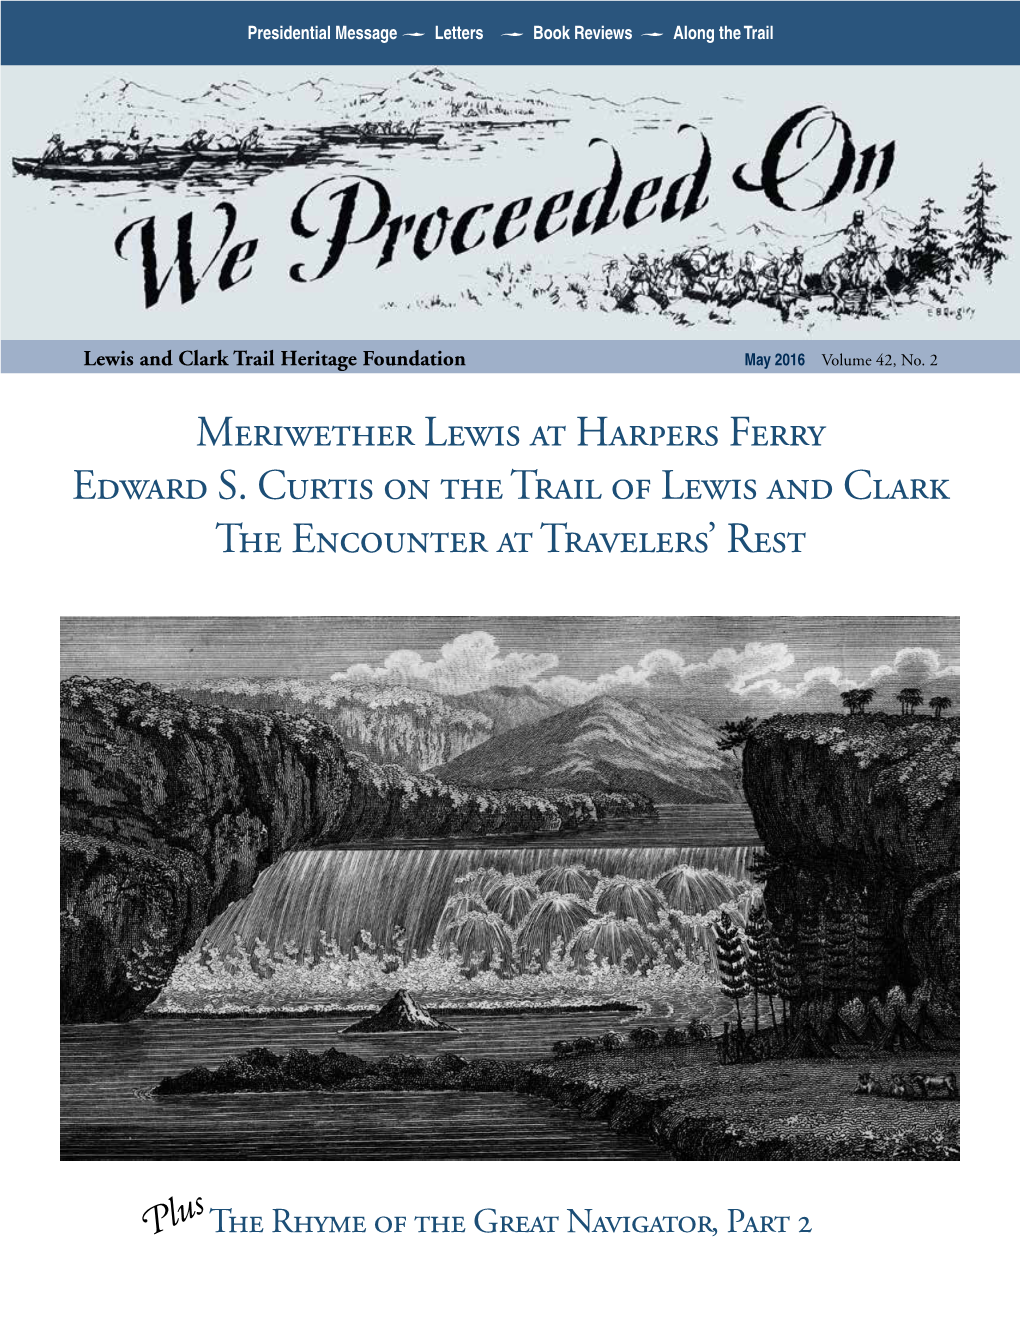 Meriwether Lewis at Harpers Ferry Edward S. Curtis on the Trail of Lewis and Clark the Encounter at Travelers’ Rest